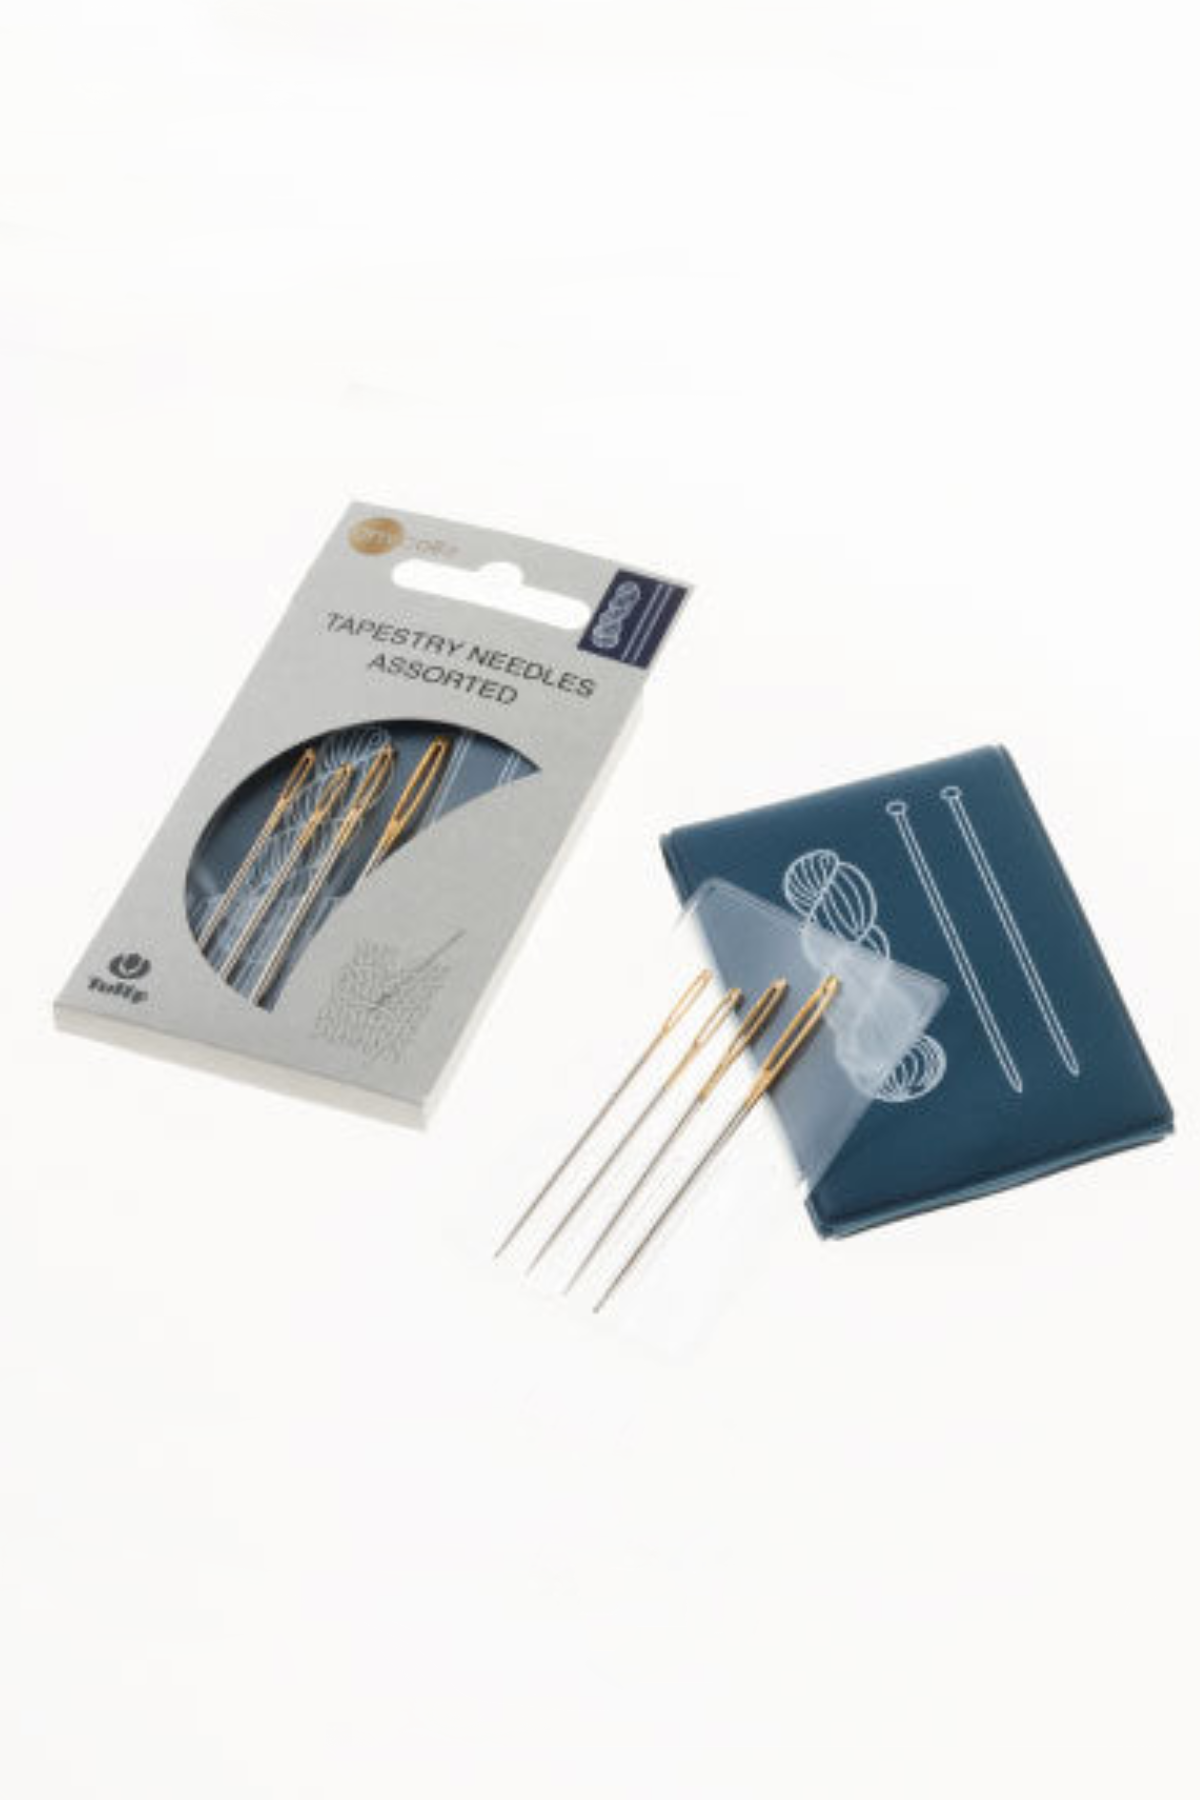 Tapestry Needle (Assorted)